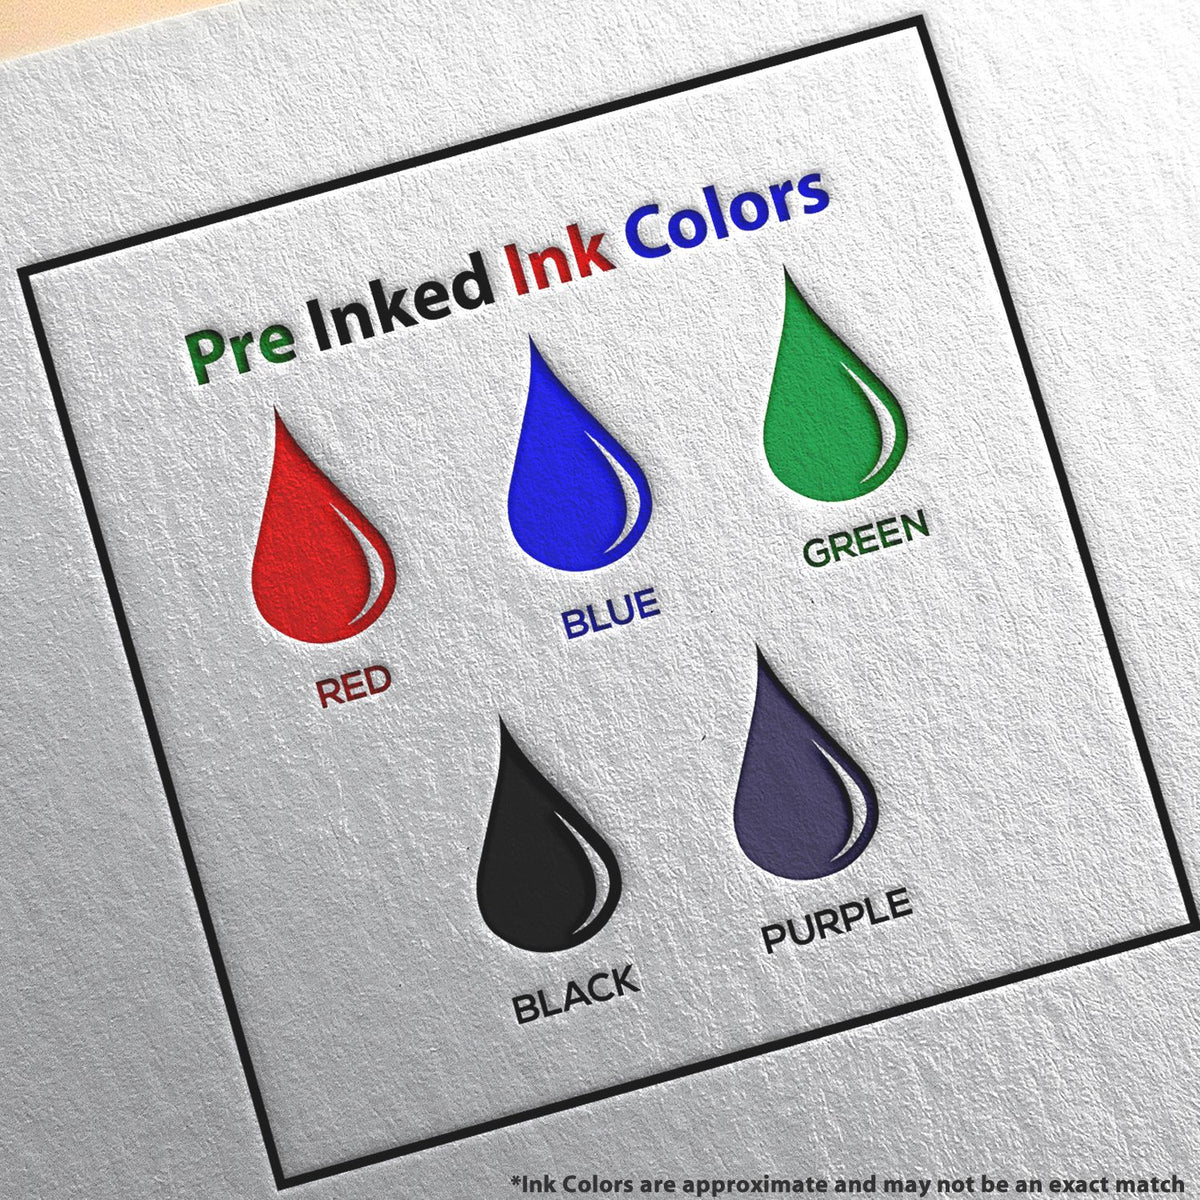 A picture showing the different ink colors or hues available for the Slim Pre-Inked Oklahoma Landscape Architect Seal Stamp product.